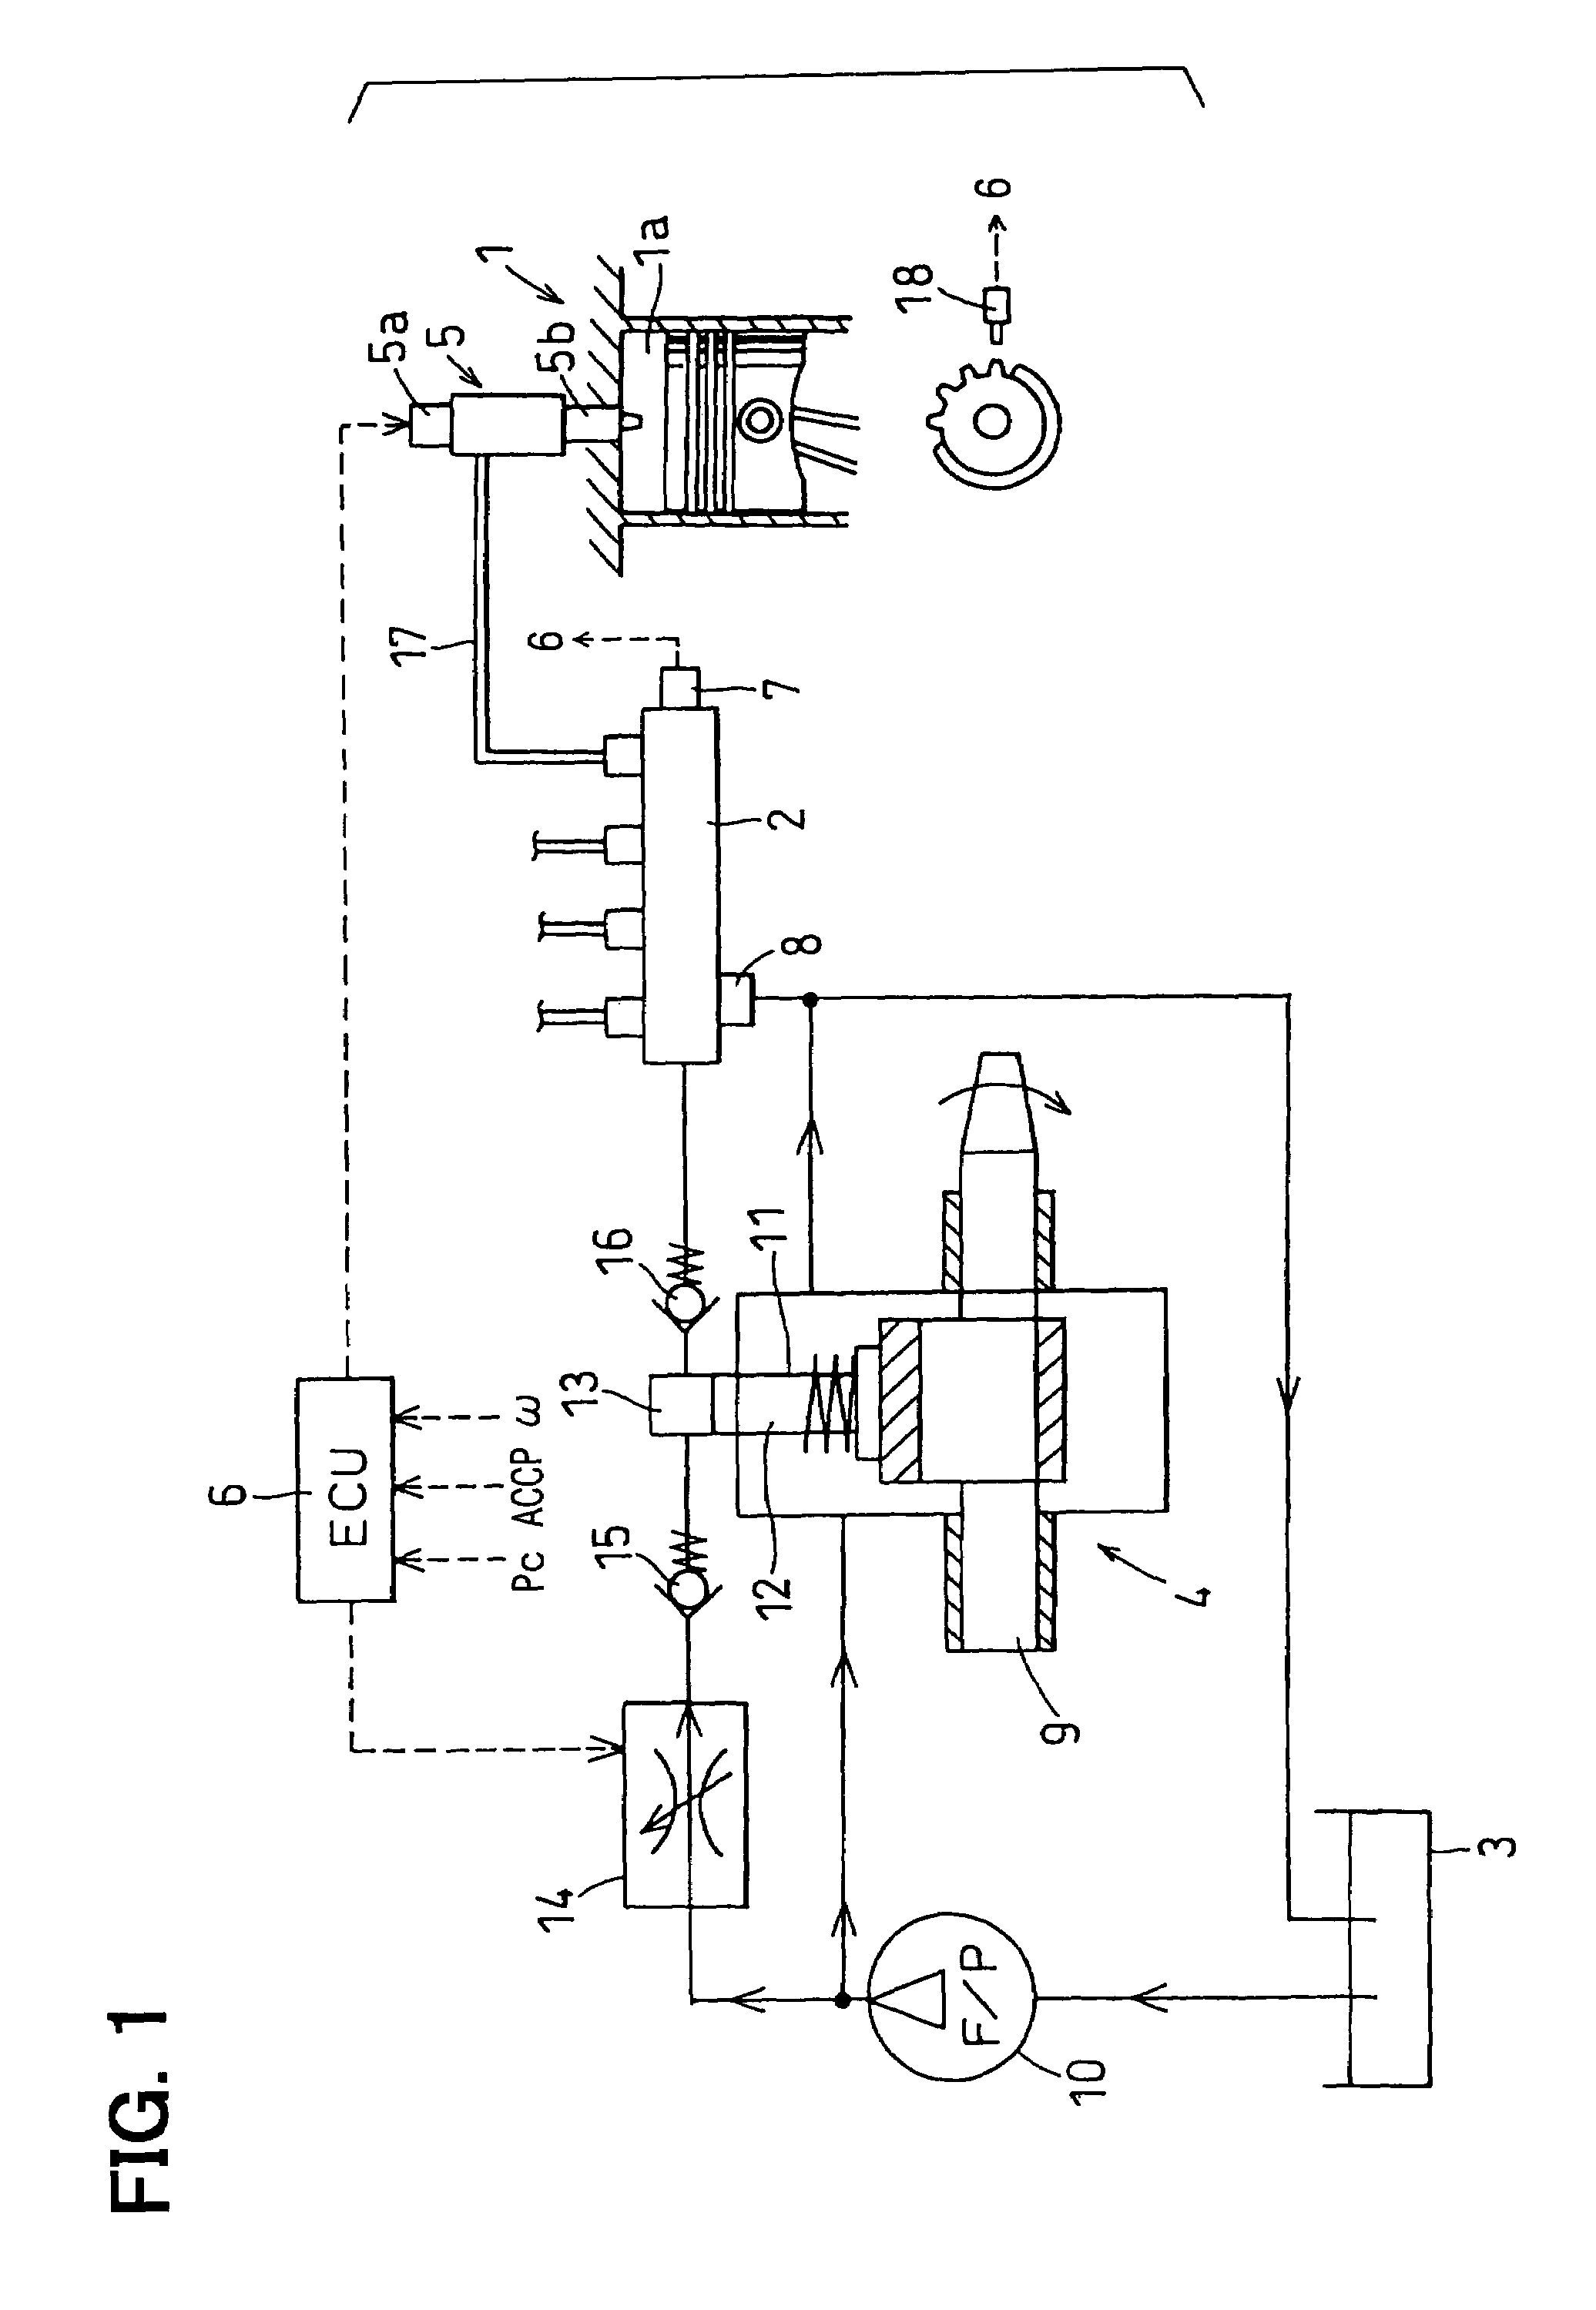 Injection control system of internal combustion engine